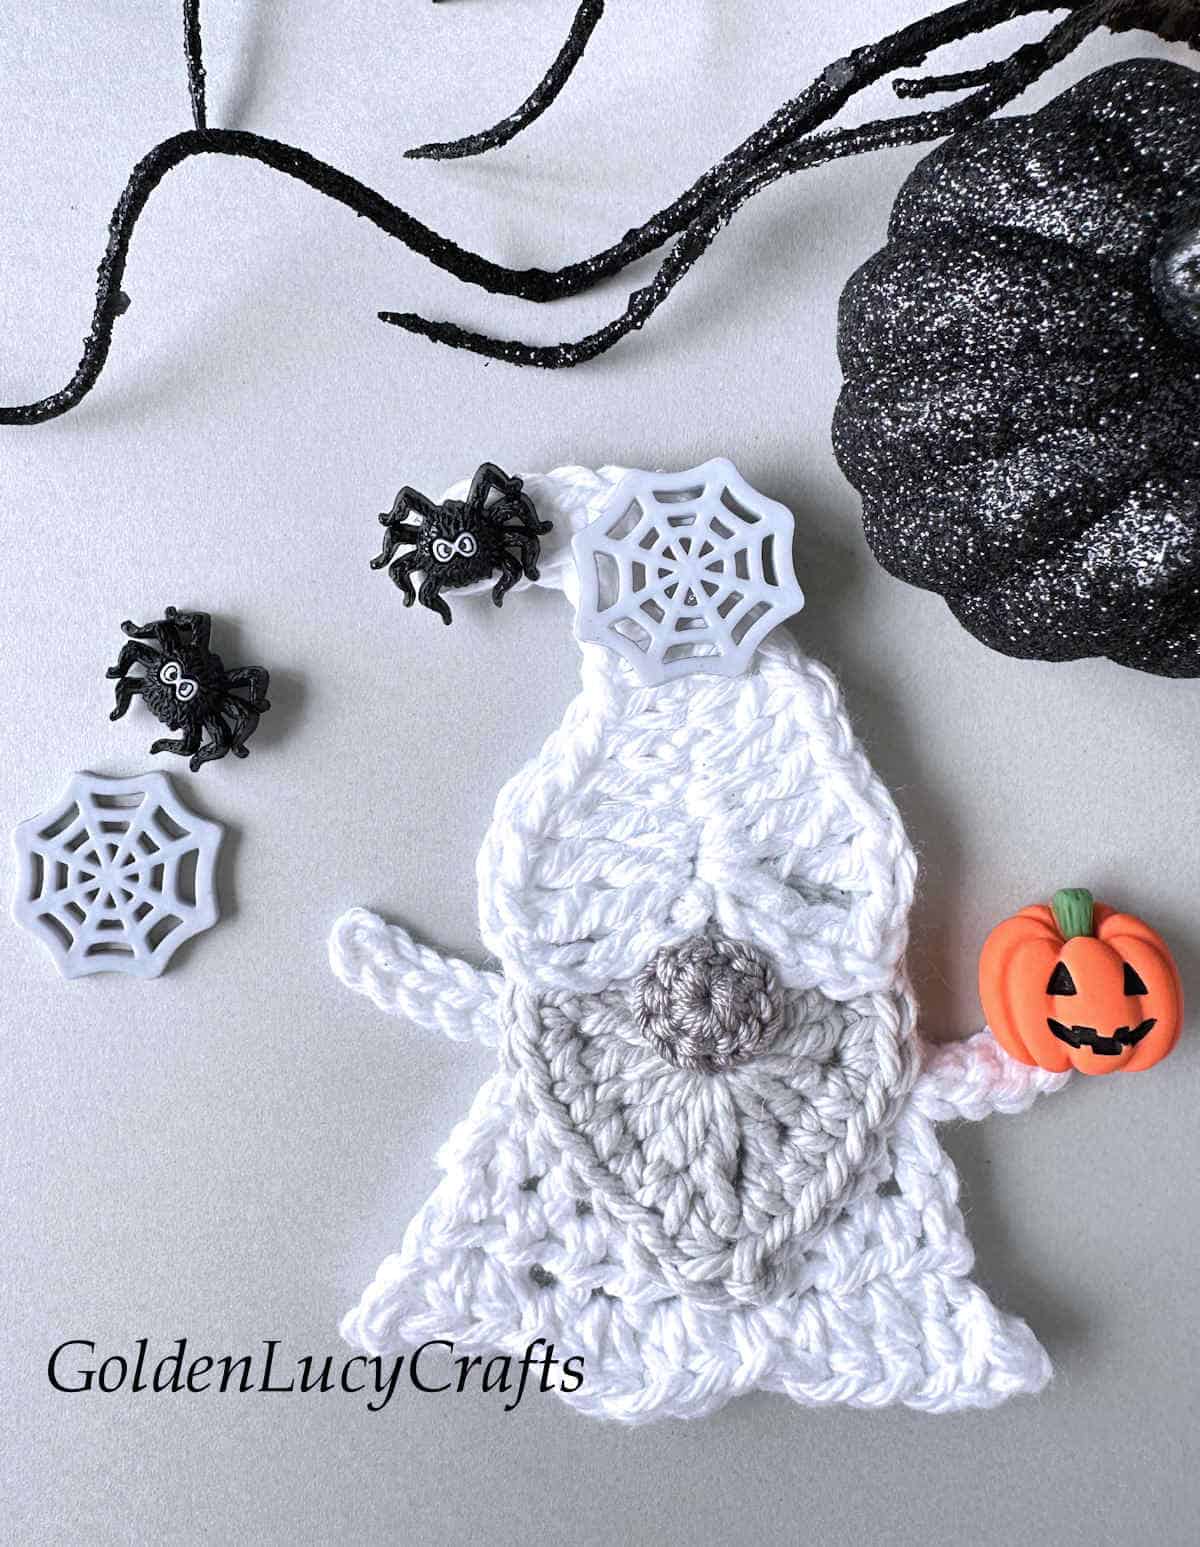 Crochet ghost gnome applique with spider and spider web on his cap and pumpkin in his hand.